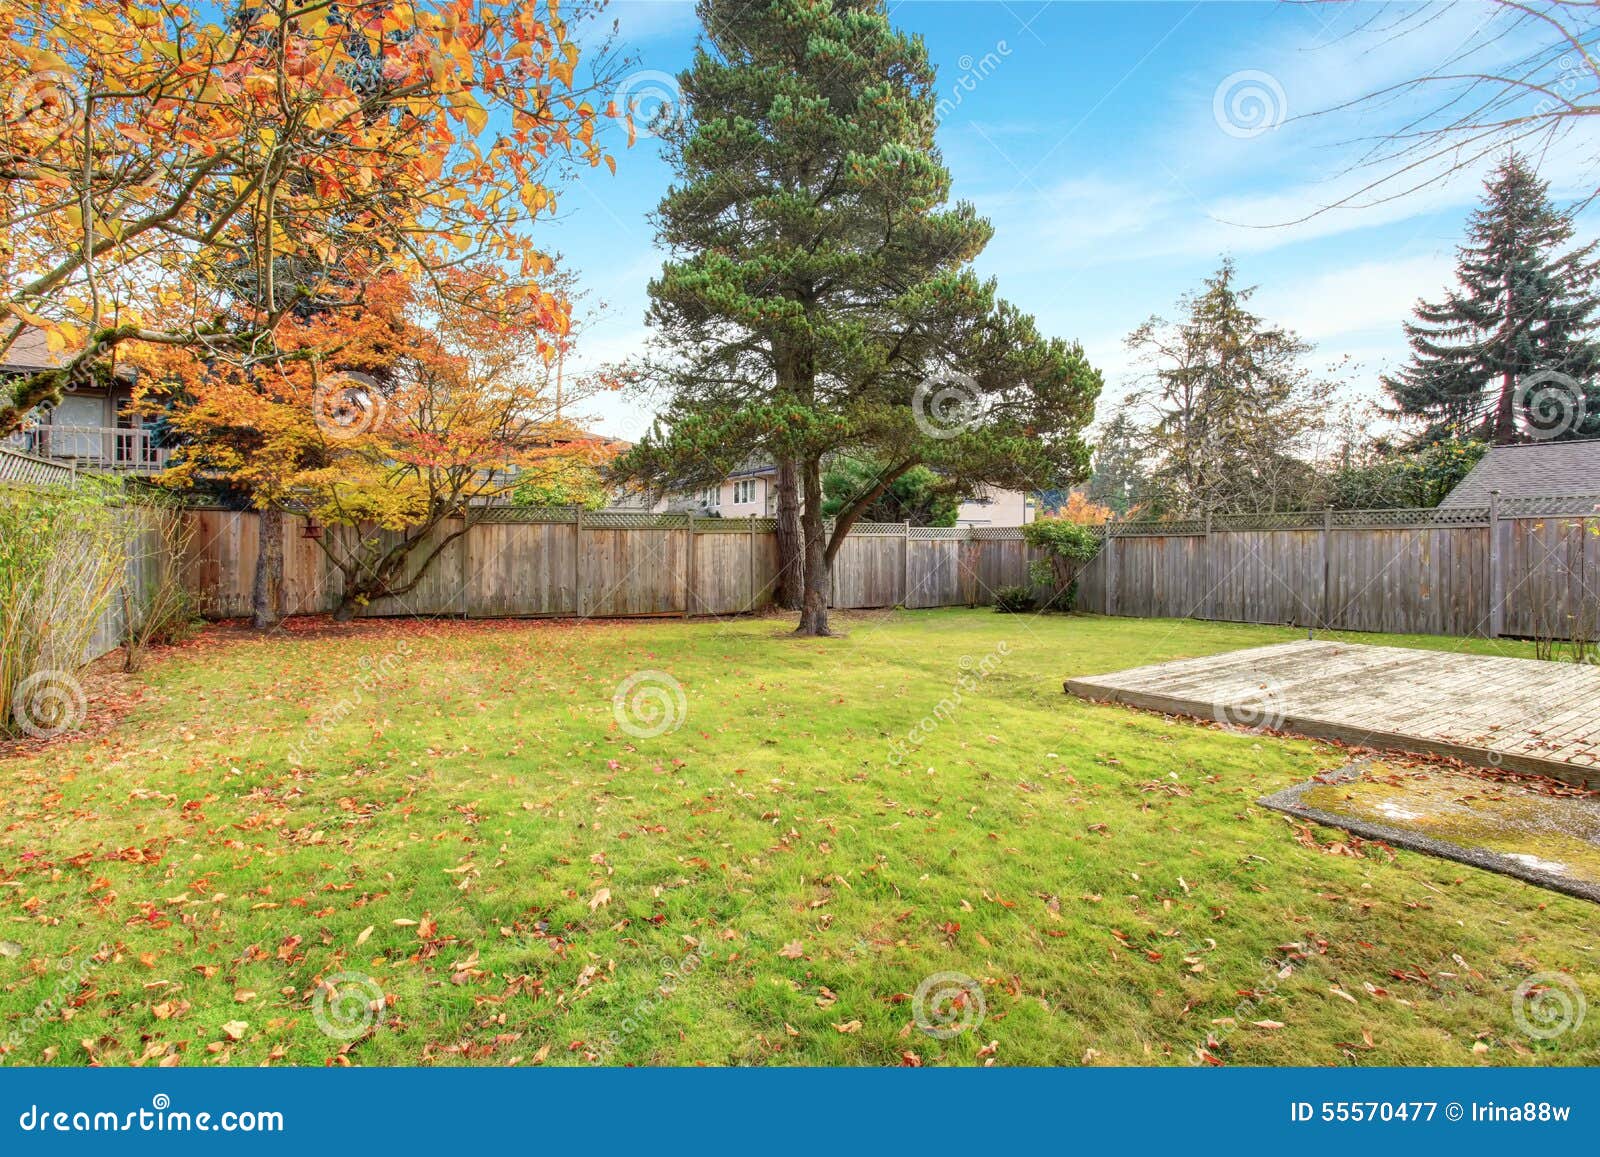 back yard with deck and grass.